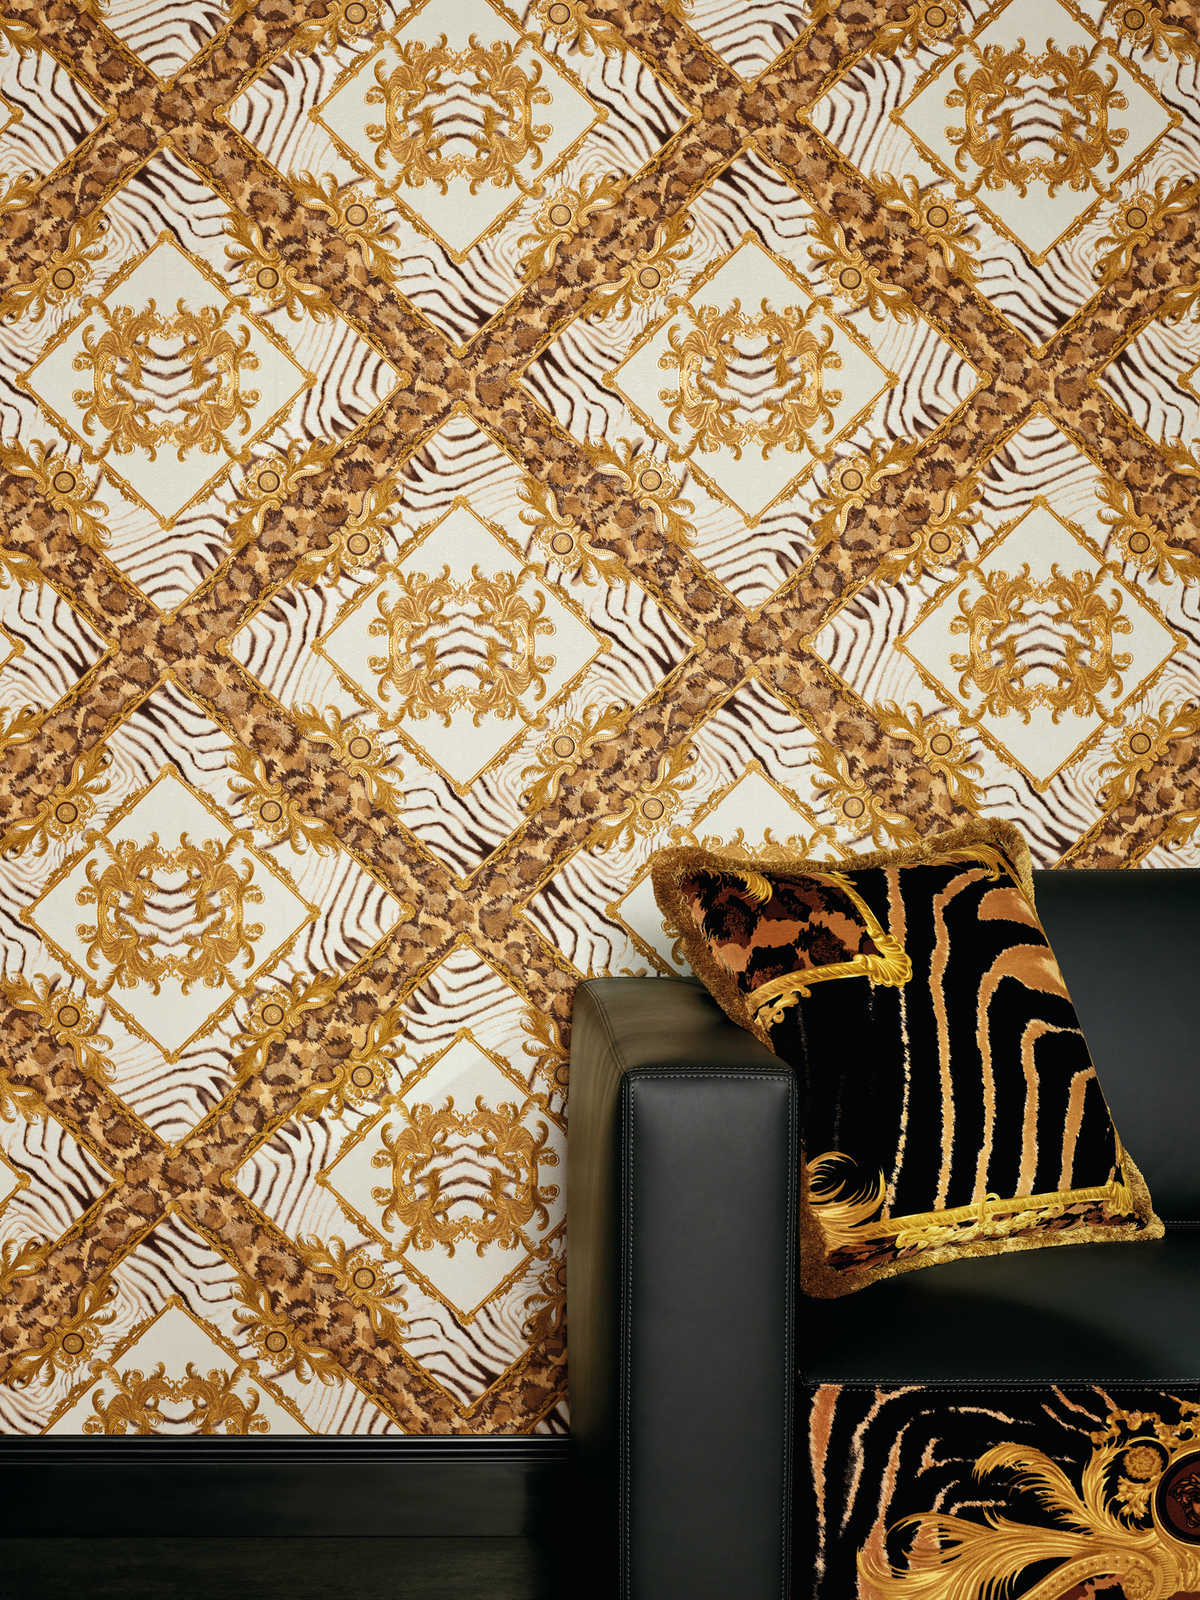             Wallpaper by VERSACE with Animal Print Design - Brown, Cream
        